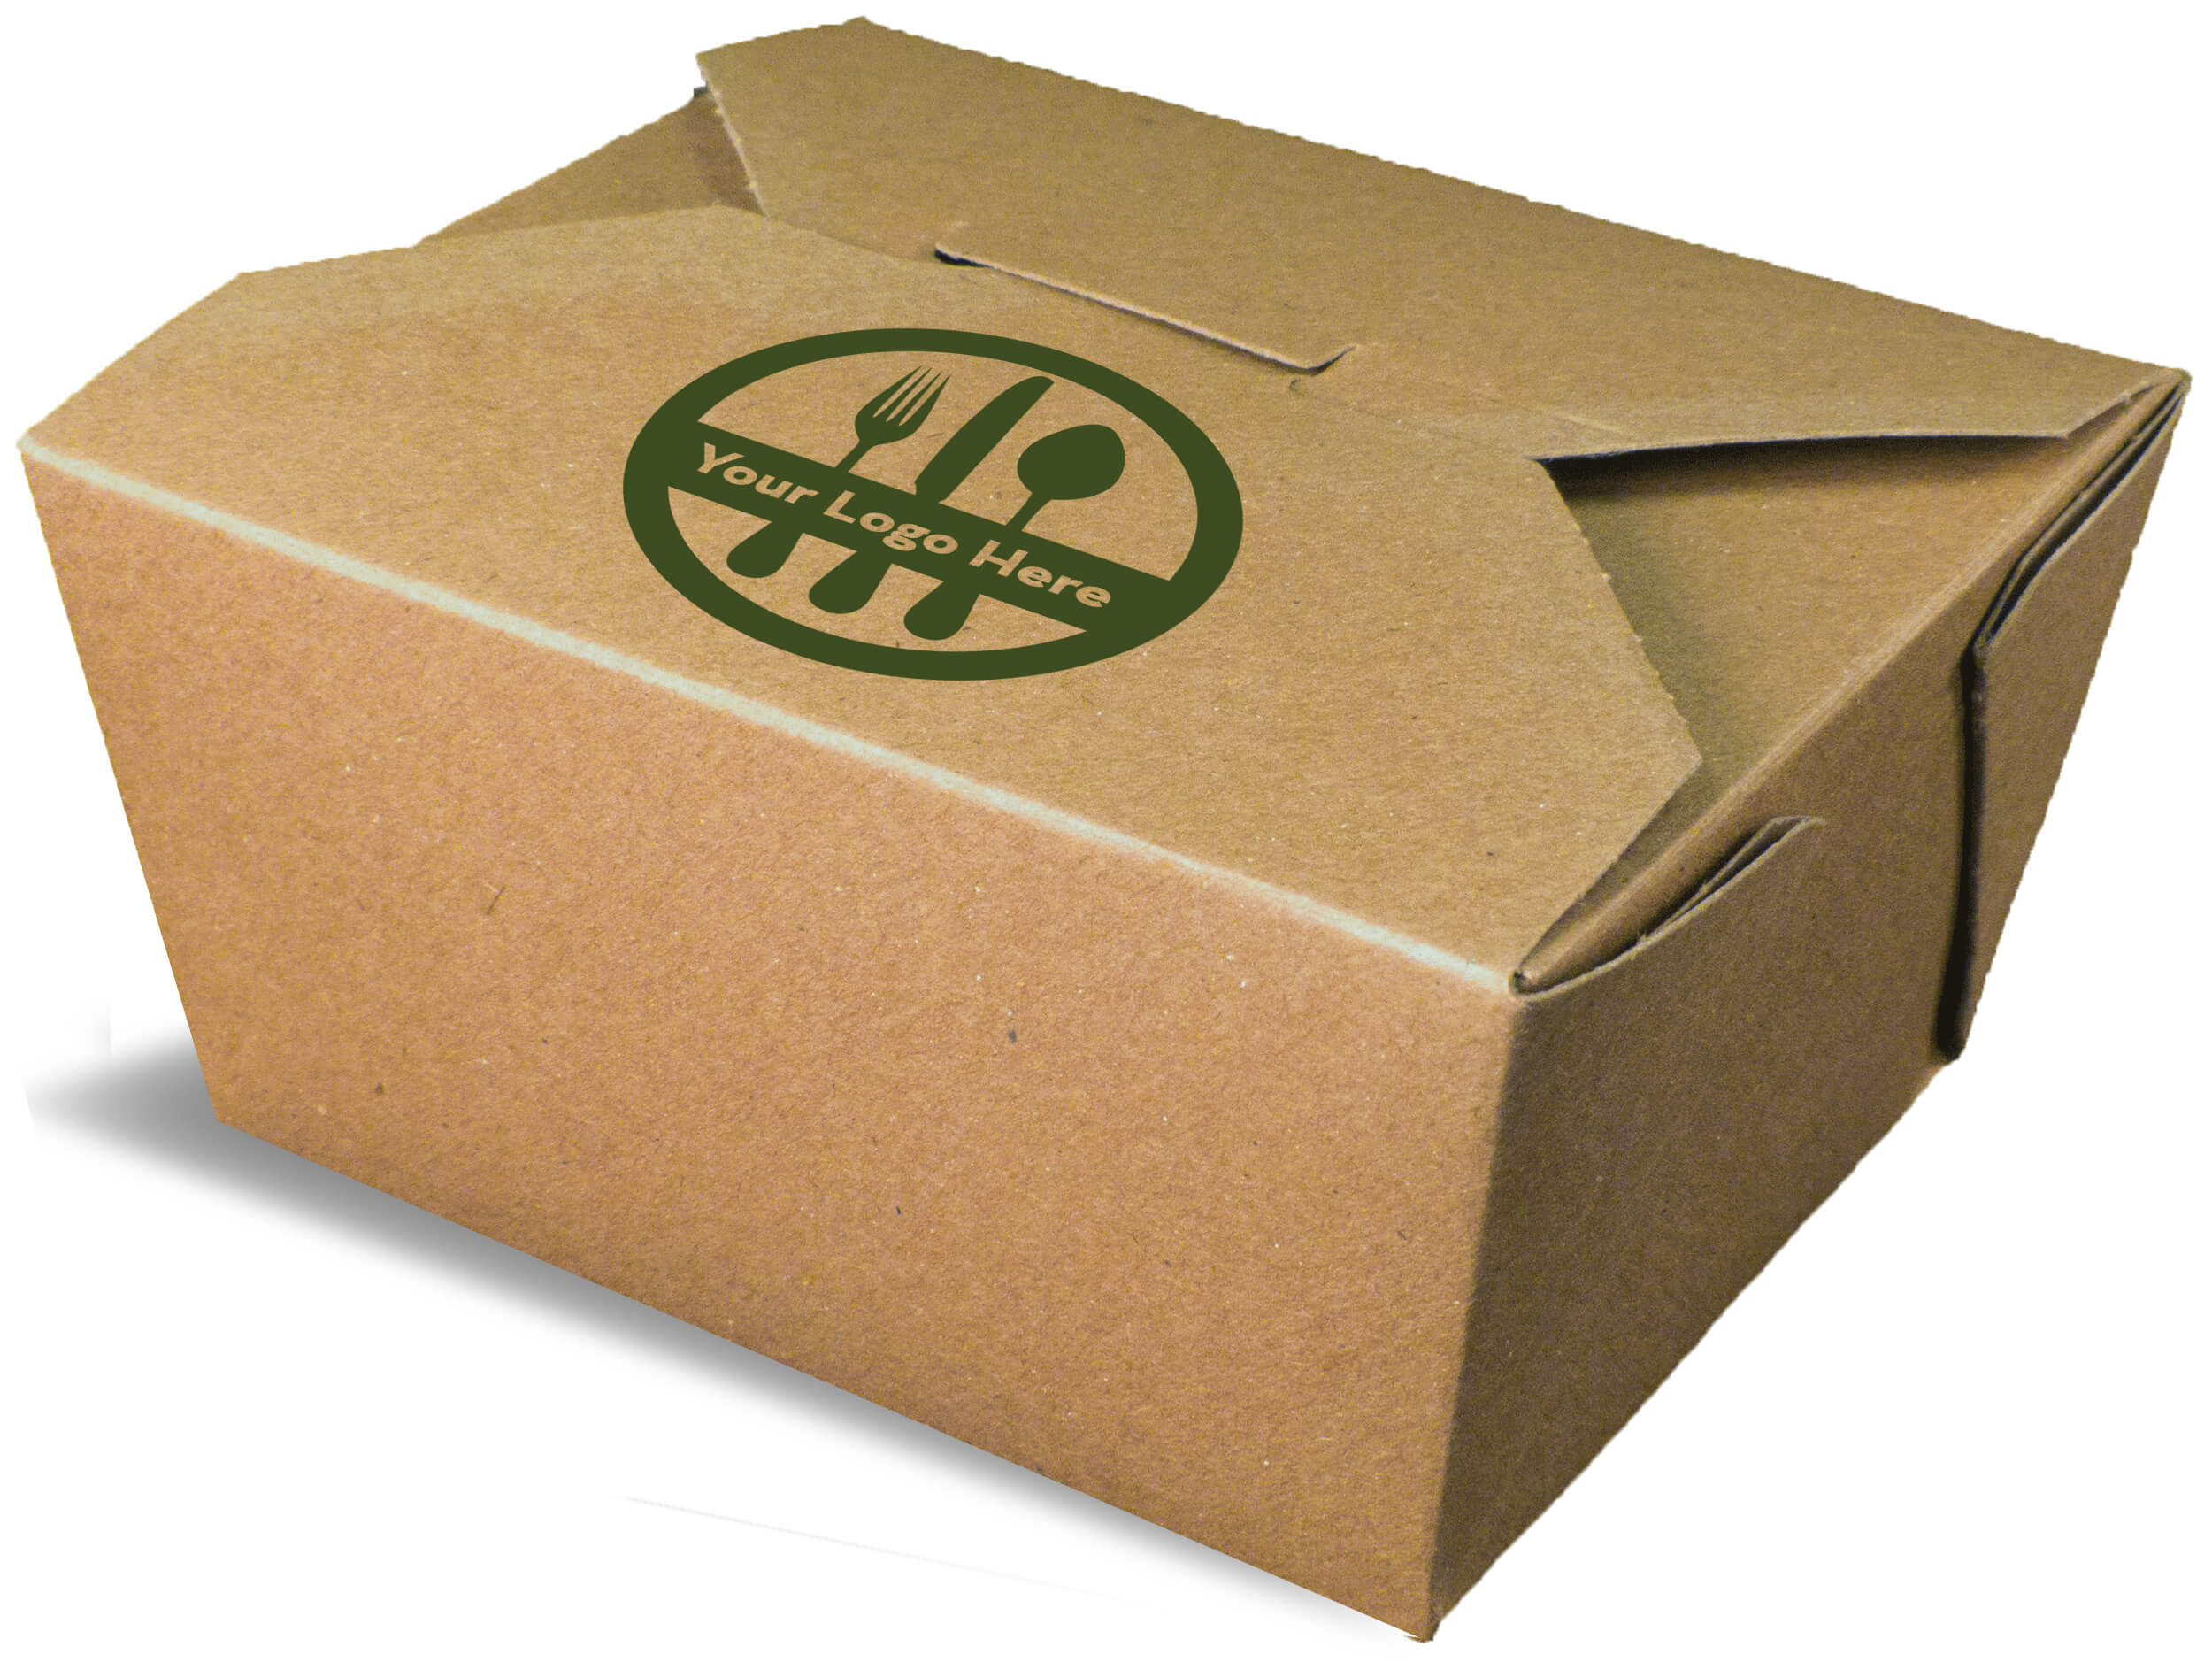 A brown rendering of an Bio-Plus Terra II folding carton container with a printed logo.